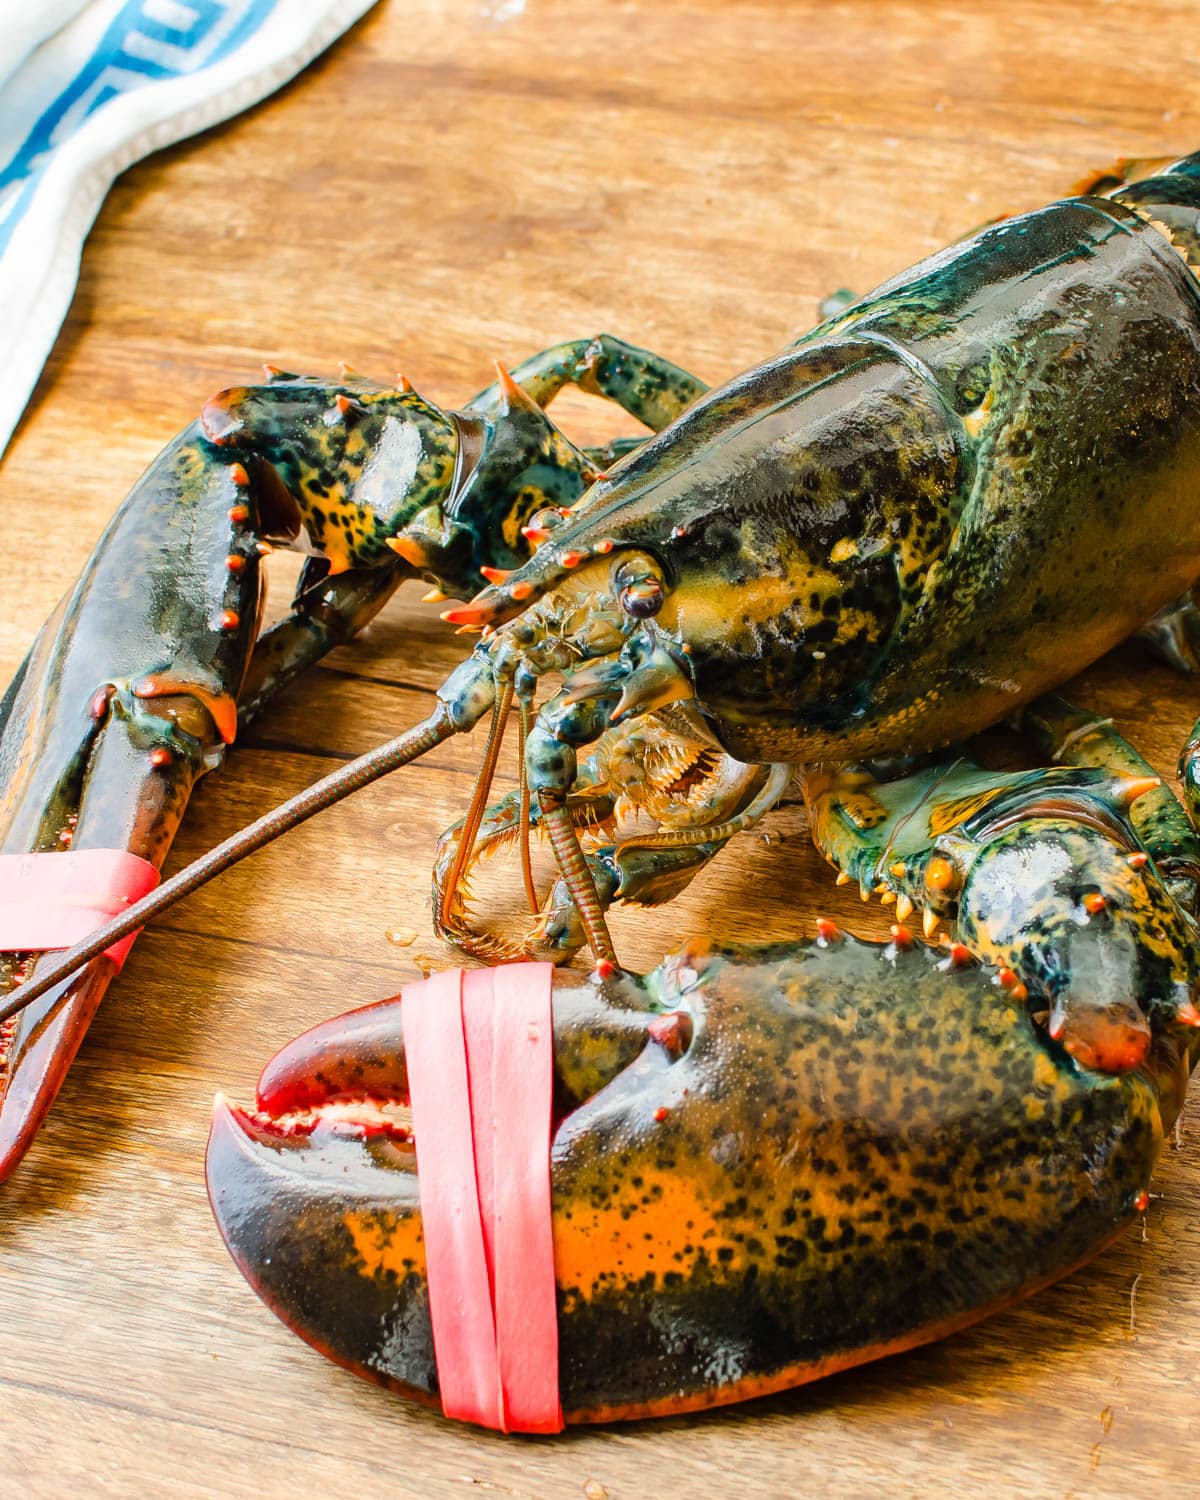 A live Maine lobster.